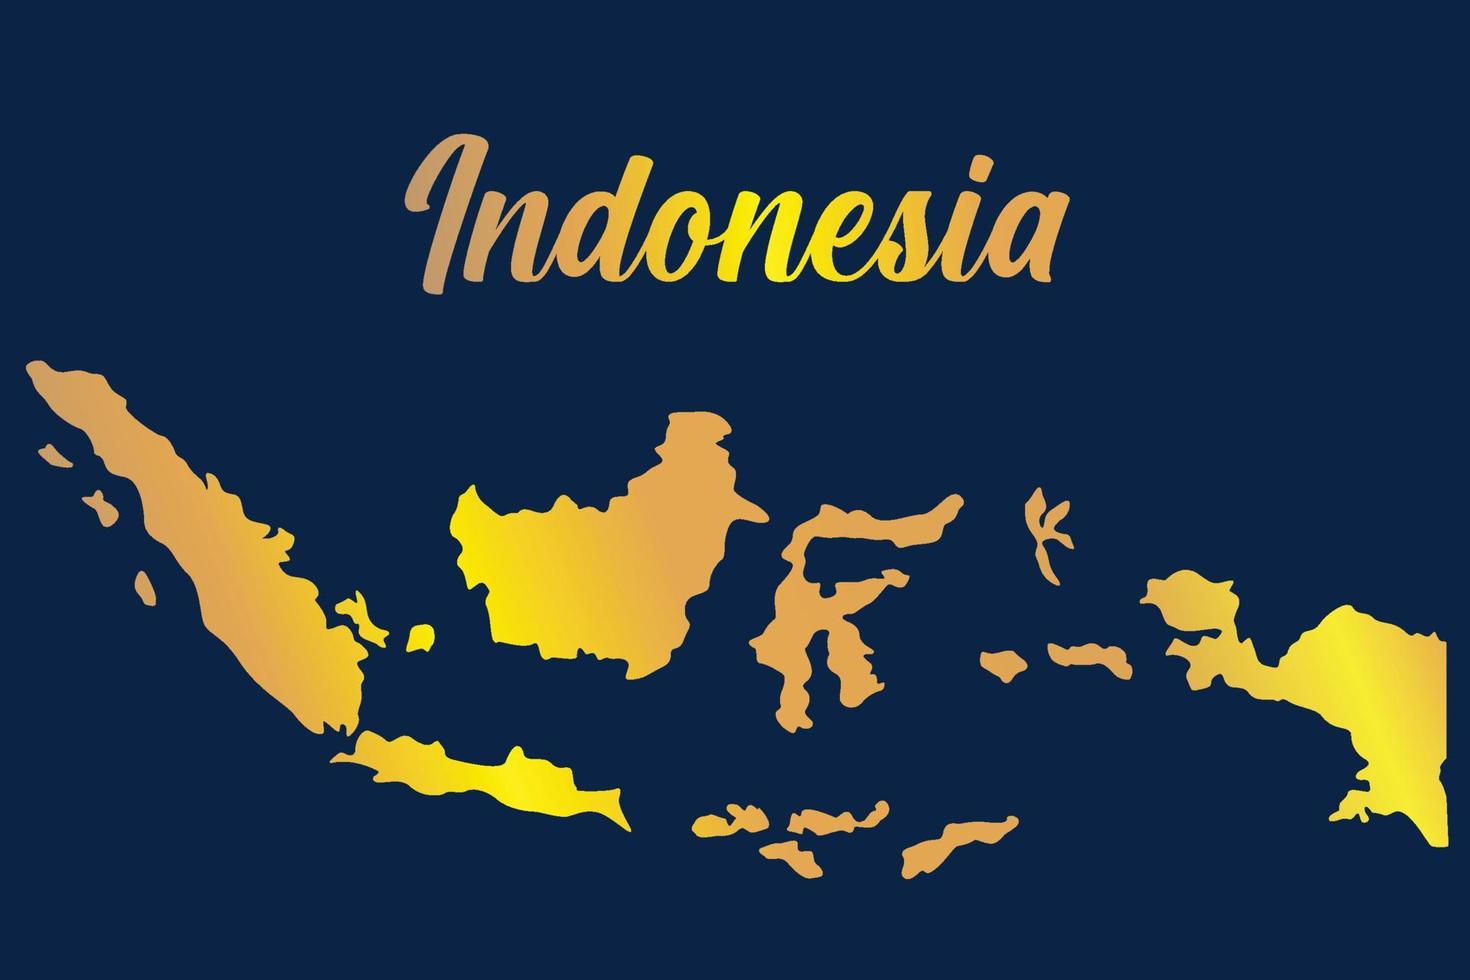 Indonesia map background with golden color vector